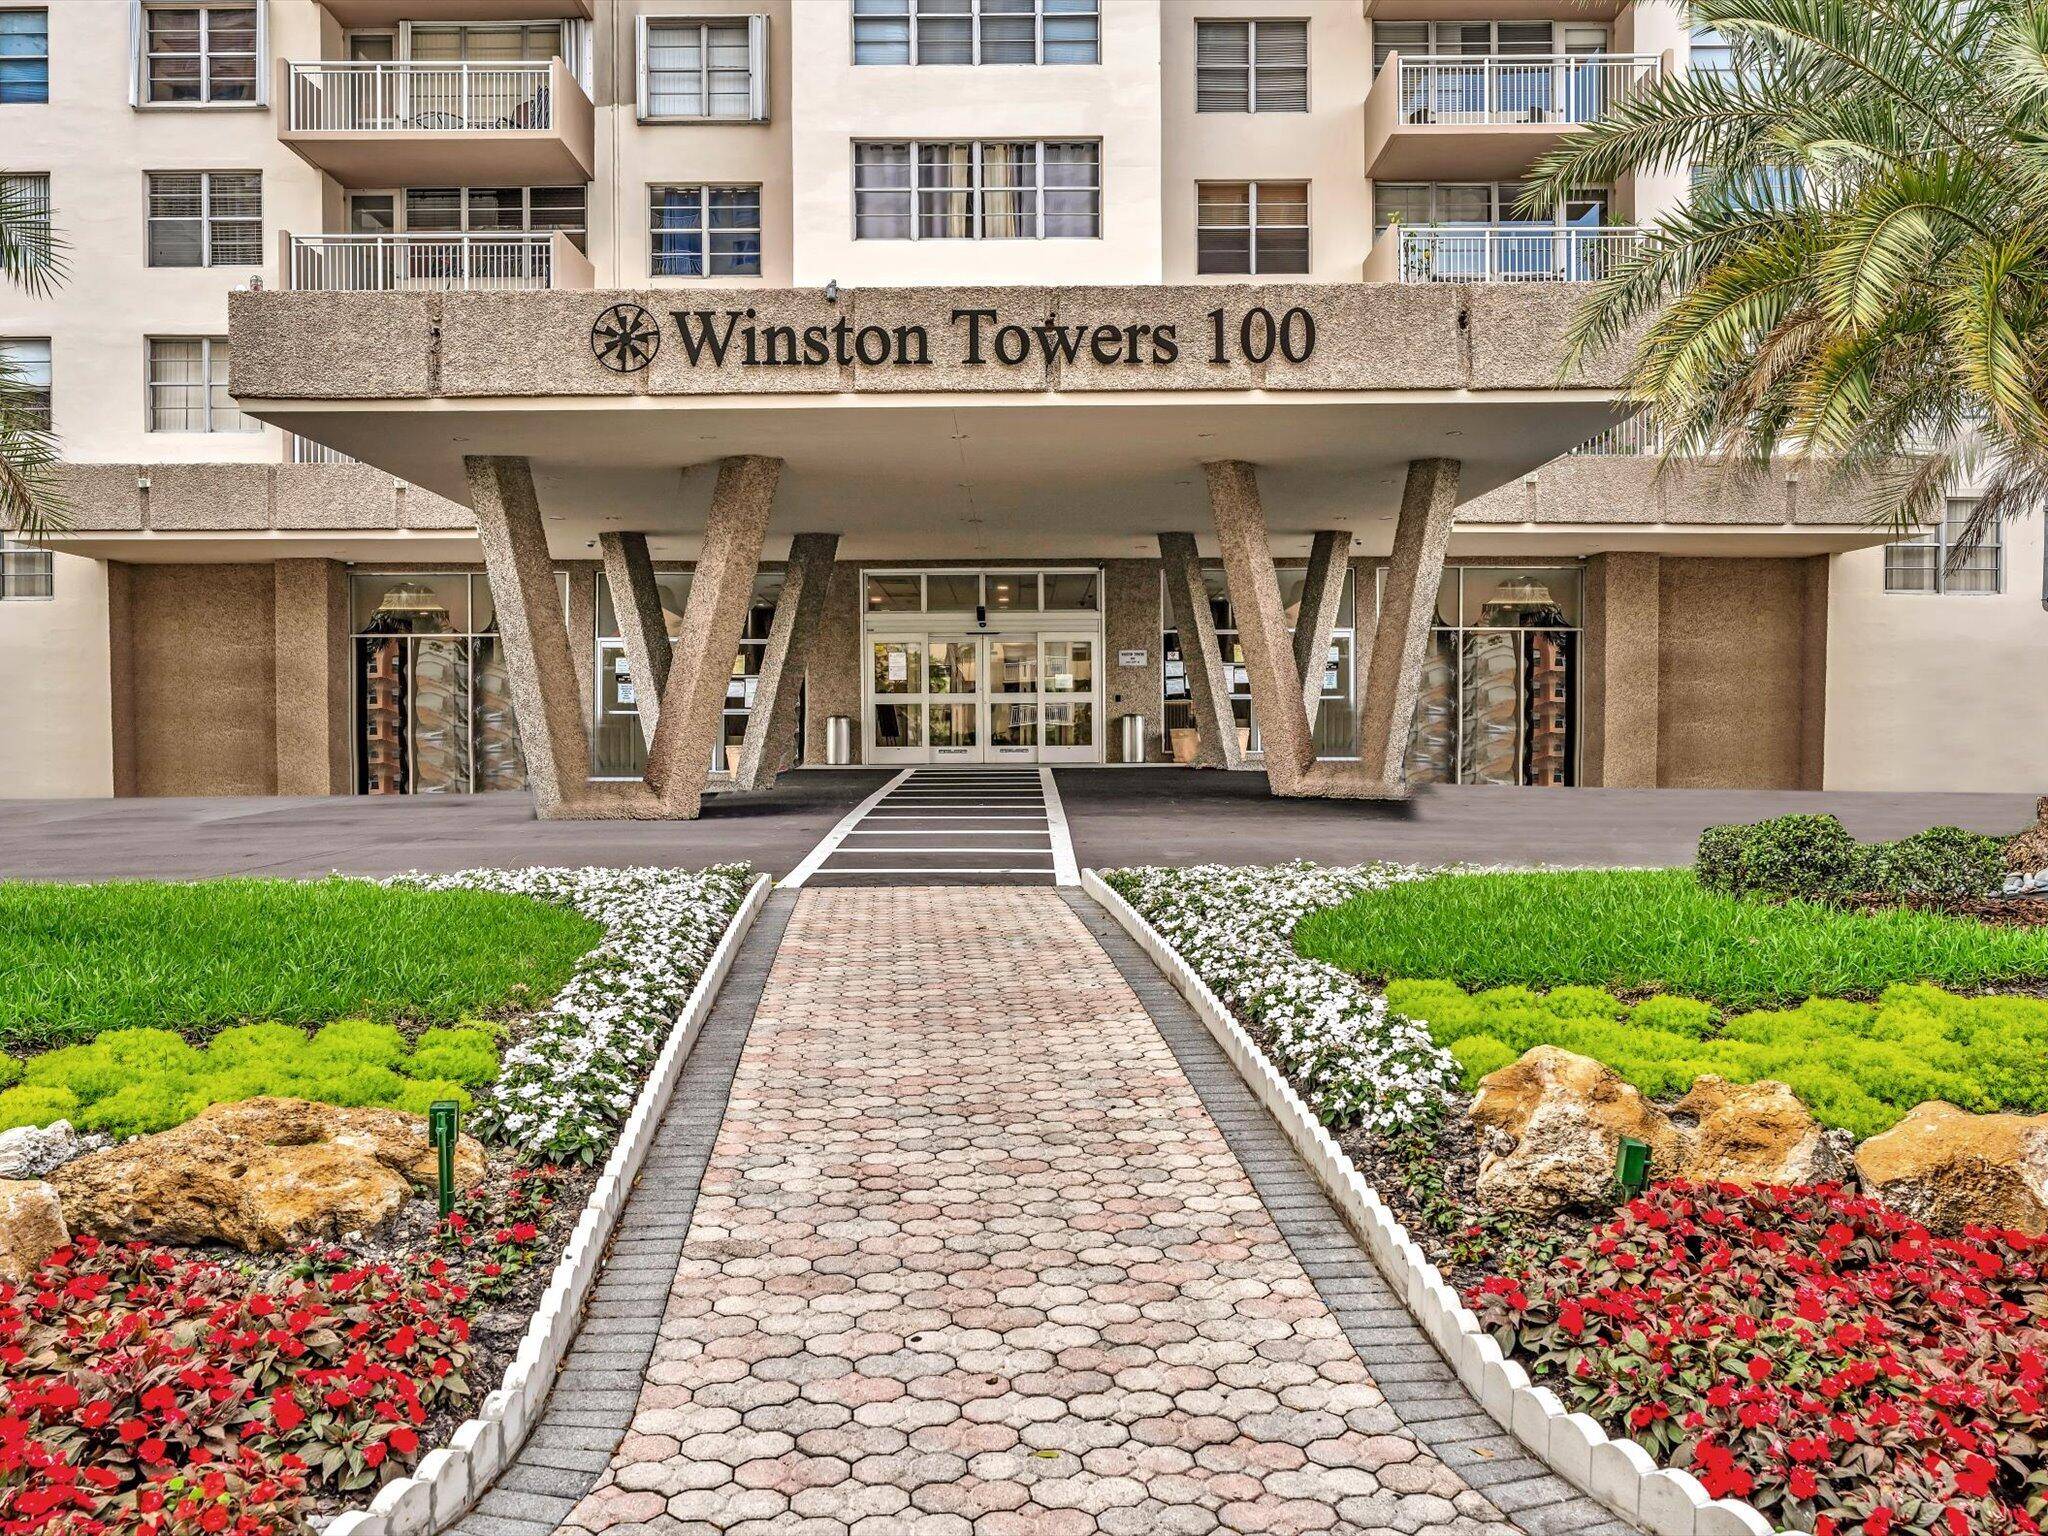 Investment Opportunity in WINSTON TOWERS 100 CONDO.